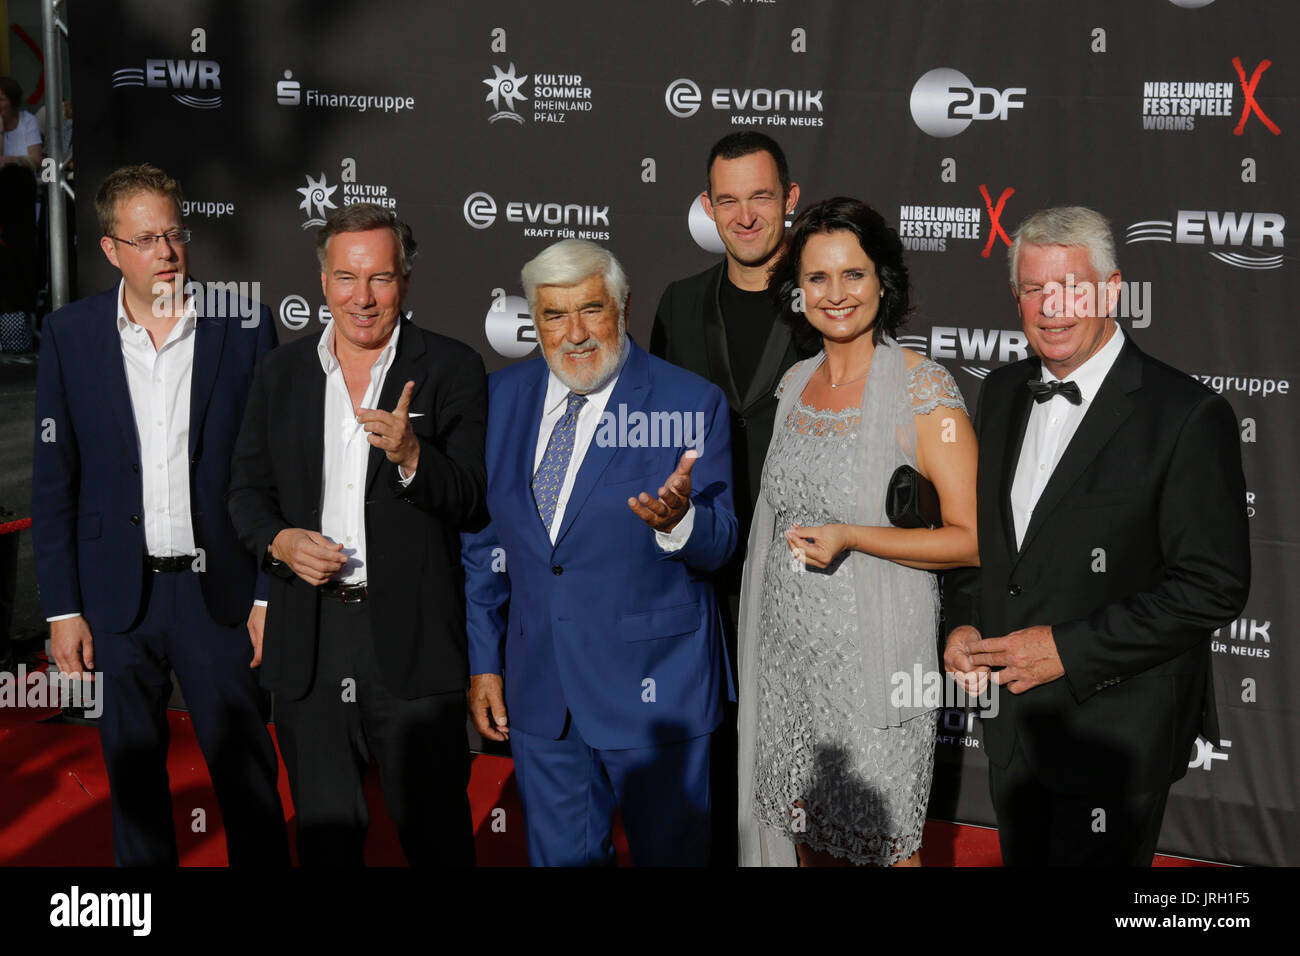 Worms, Germany. 04th Aug, 2017. Nico Hofmann, the intendant of the Nibelung Festival, German actor Mario Adorf, author Albert Ostermaier, Kathrin Anklam-Trapp, the local member of the Rhineland-Palatine parliament, and Michael Kissel, the Lord Mayor of Worms pose from left to right on the red carpet for the cameras. Actors, politicians and other VIPs attended the opening night of the 2017 Nibelung Festival in Worms. The play in the 16. Season of the festival is called ‘Glow - Siegfried of Arabia' from Albert Ostermaier. Credit: Michael Debets/Pacific Press/Alamy Live News Stock Photo